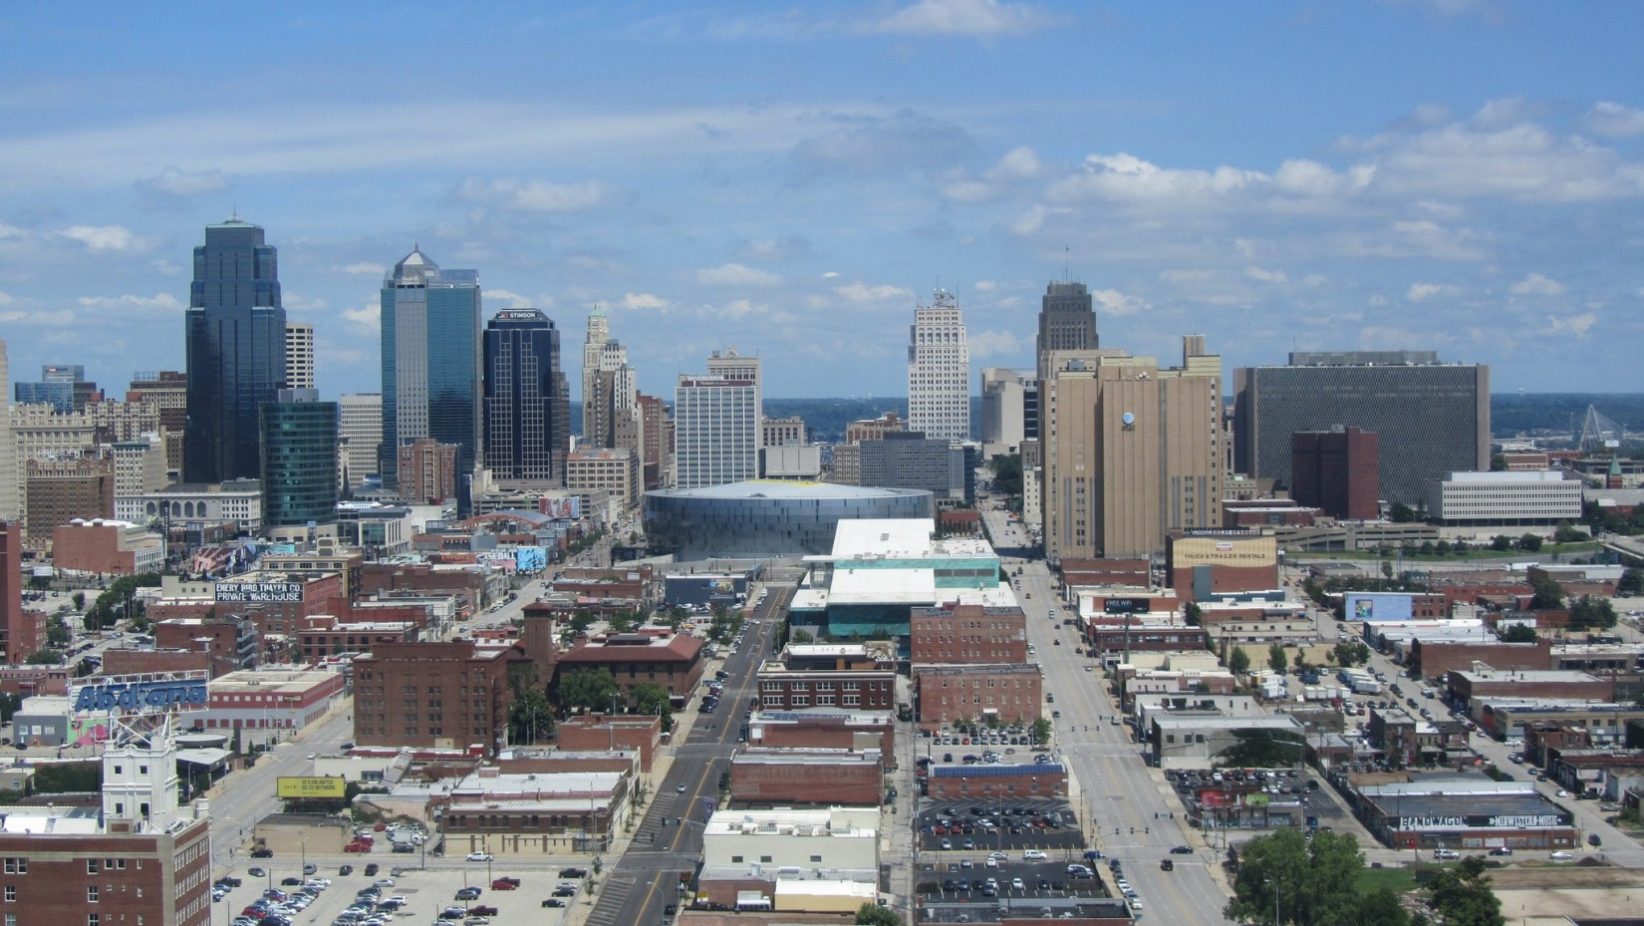 Kansas City gigabit projects can snag up to $25K from Mozilla